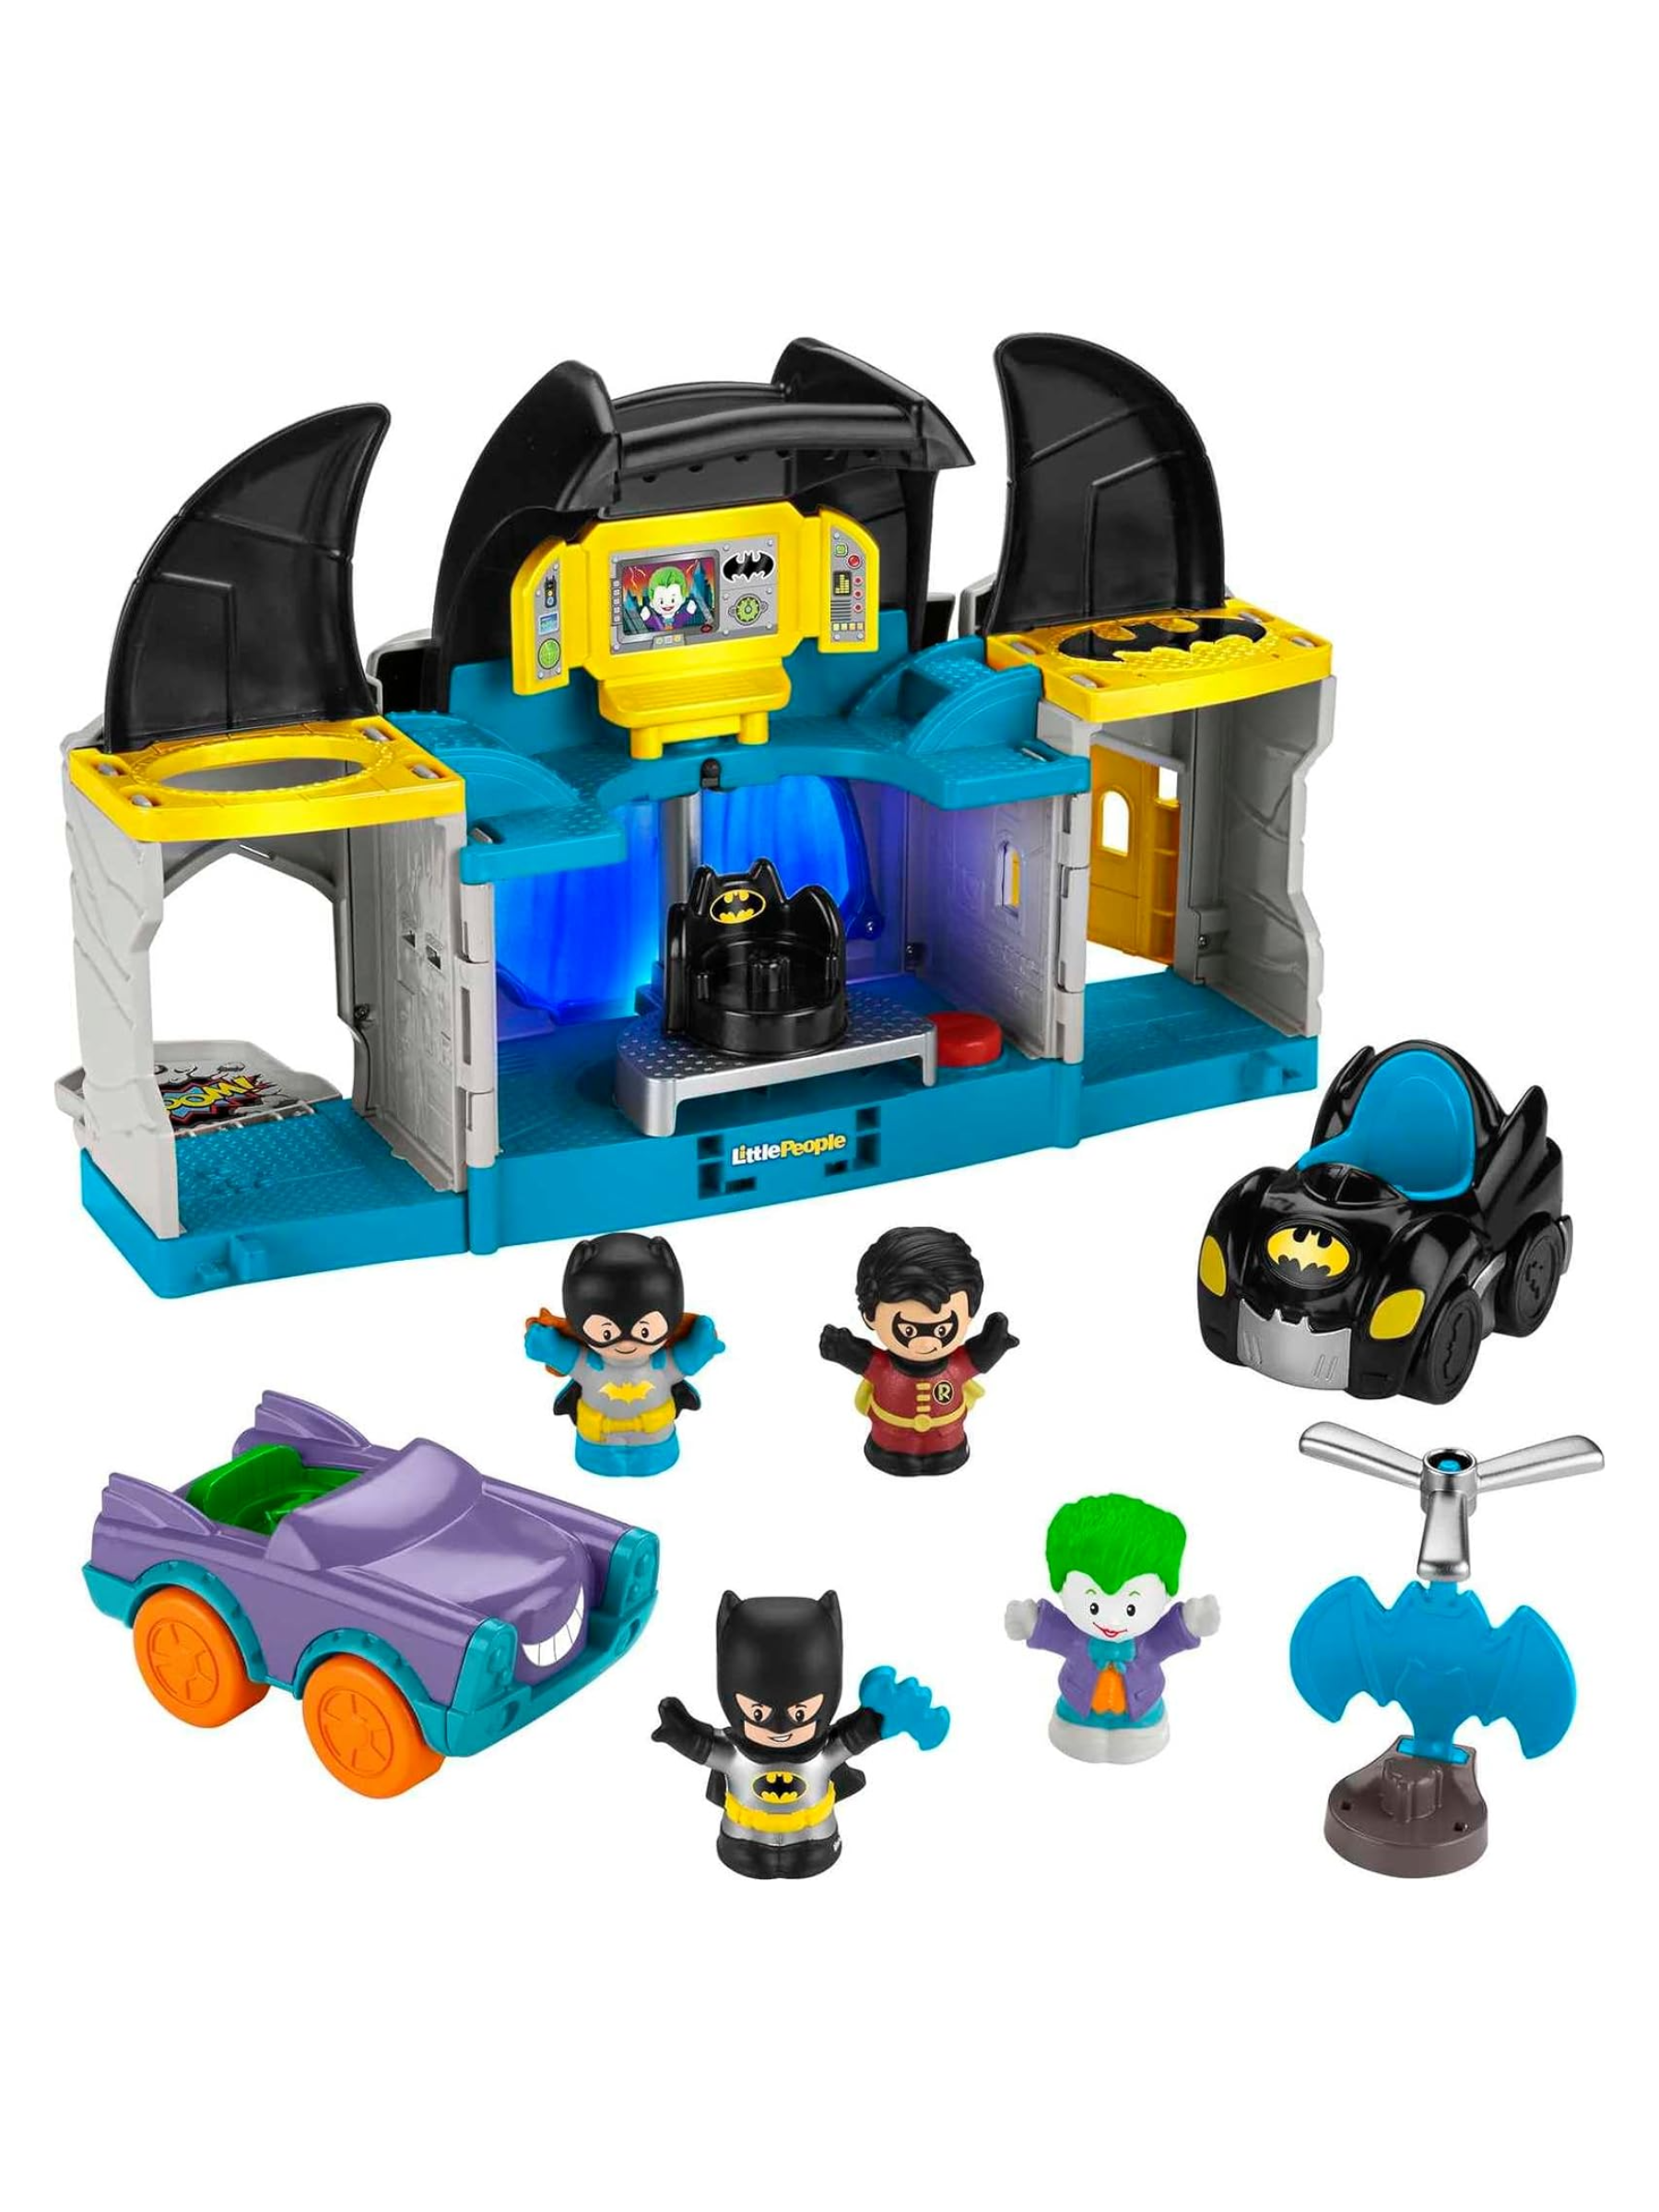 <p>Think of this set as their very first dollhouse. All of the pieces and figurines are the perfect easy-to-grasp size for 1-year-olds. The house itself is sturdy enough to withstand play, plus packed with interactive features to help hone those fine motor skills. Tiny hands will have fun sending Batman chasing after The Joker in the included push-along vehicles, moving the elevator chair up and down, turning lights on and off, and more.</p> <p> <strong>What our expert says:</strong> My friend’s 18-month-old loves all of her Little People (she has Disney characters, farm animals, and more), so much that she refuses to go to bed without saying goodnight to each and every one.</p> $48, Amazon. <a href="https://www.amazon.com/DC-Super-Friends-Fisher-Price-Batcave/dp/B09CHKMZB3">Get it now!</a><p>Sign up for today’s biggest stories, from pop culture to politics.</p><a href="https://www.glamour.com/newsletter/news?sourceCode=msnsend">Sign Up</a>